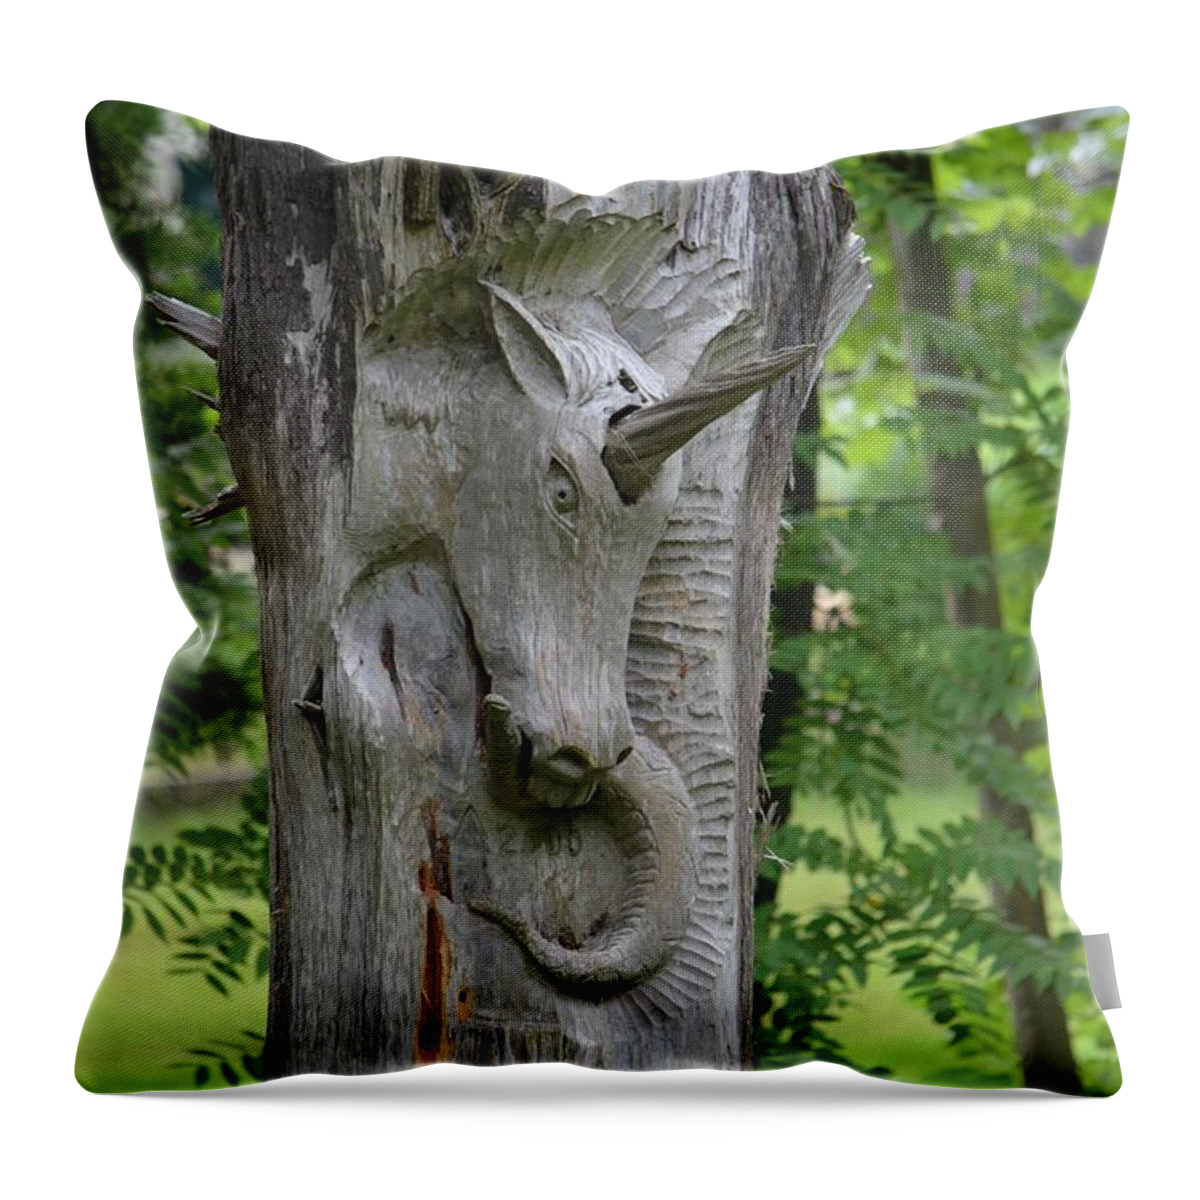 The Magic Of Unicorns Throw Pillow featuring the photograph The Magic of Unicorns by Maria Urso